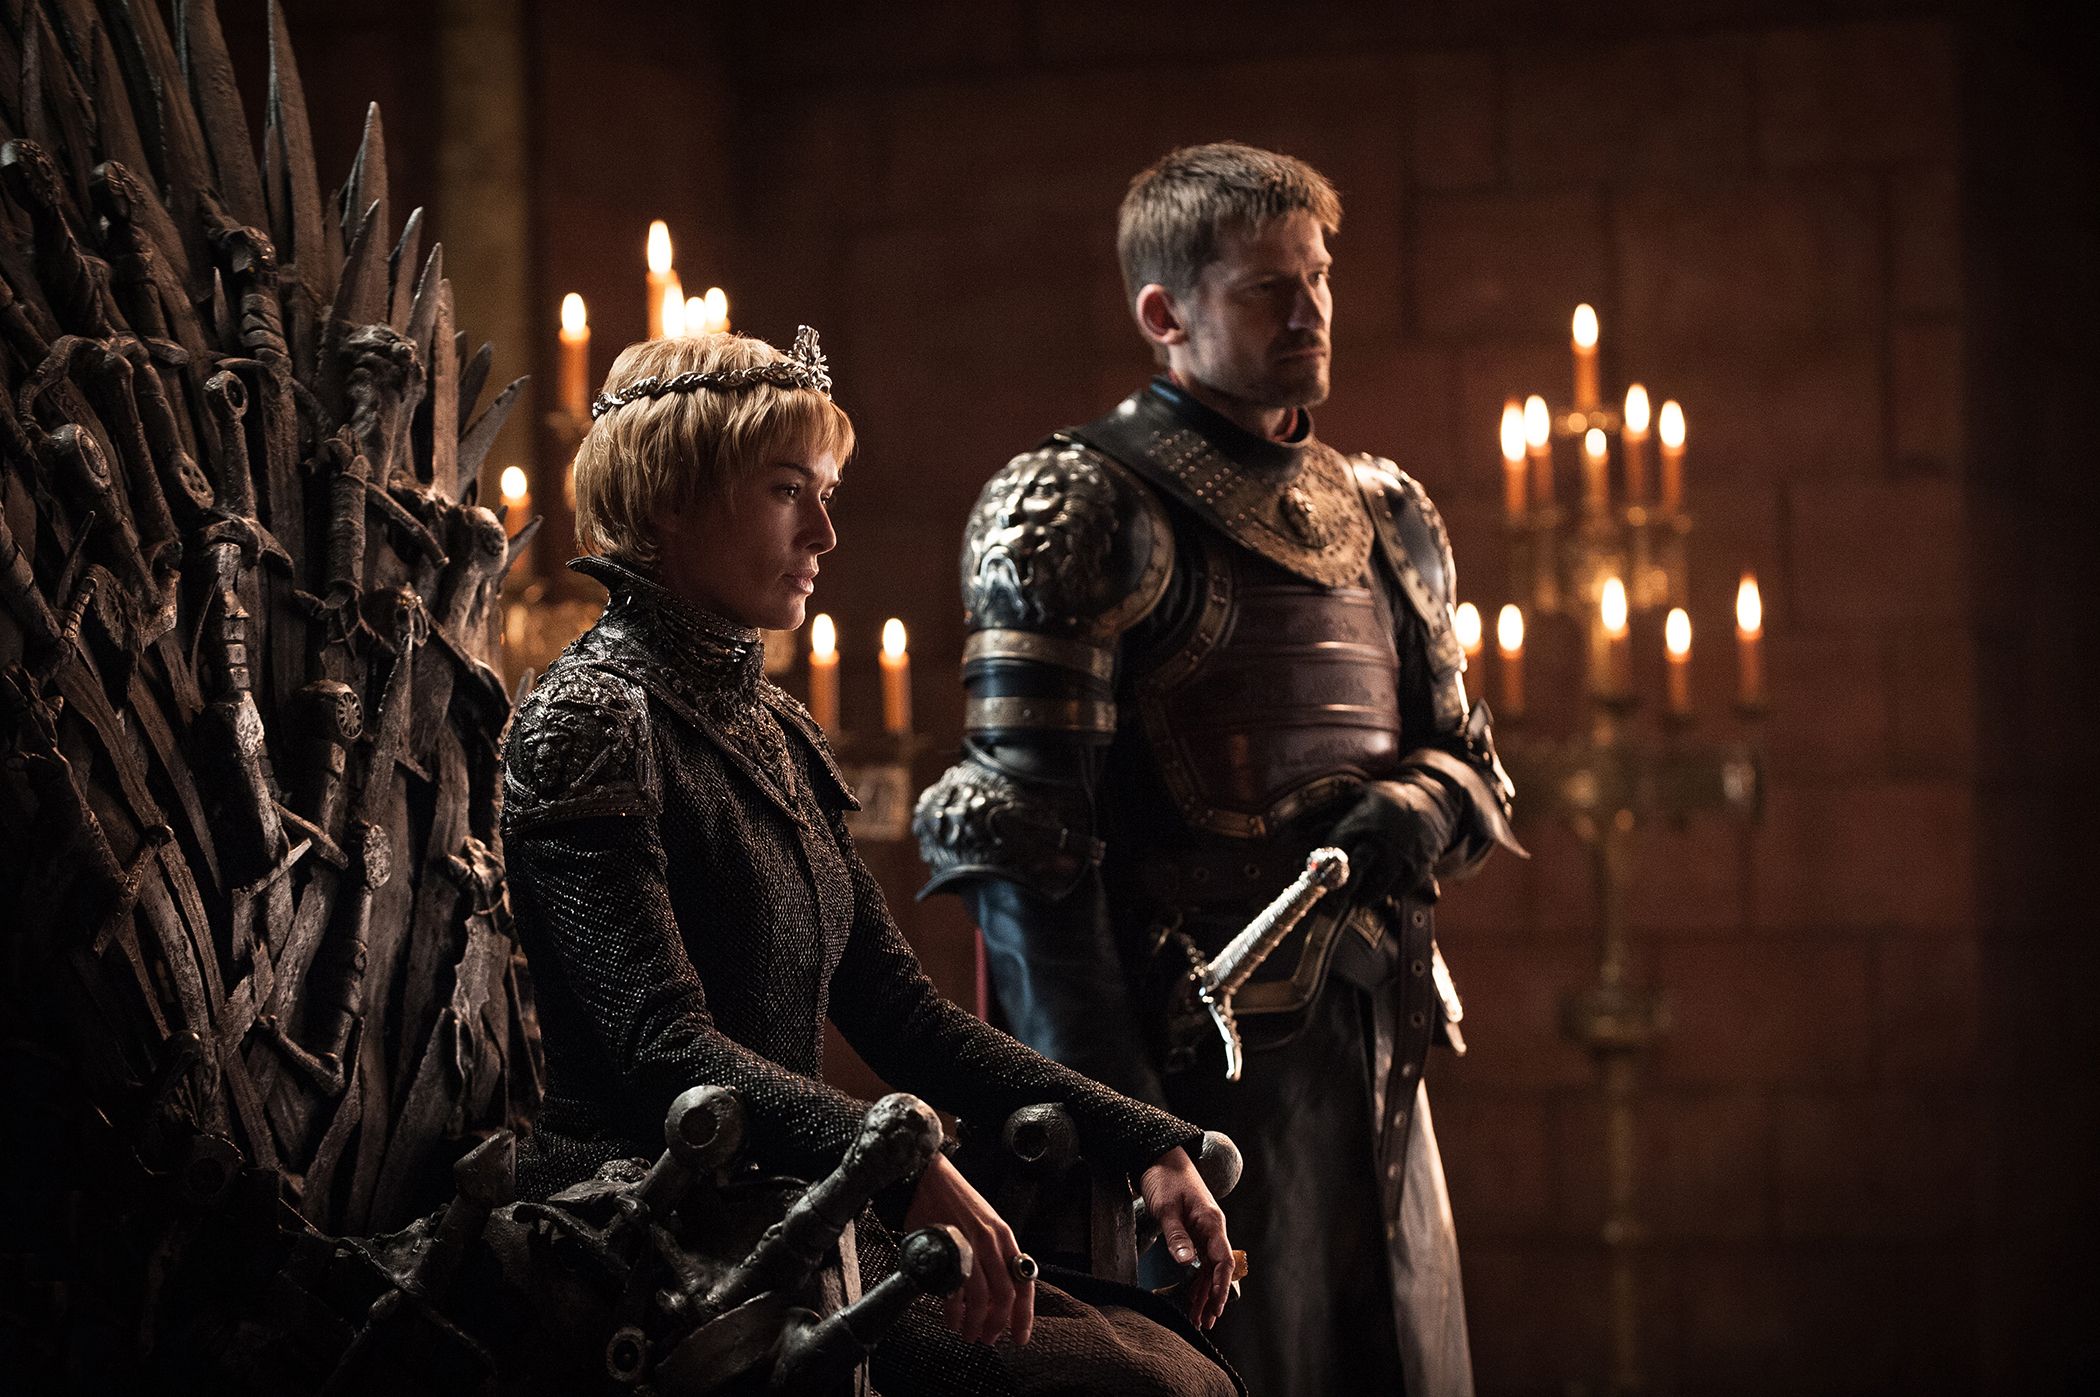 Cersei and Jaime Lannister - Game of Thrones Season 7